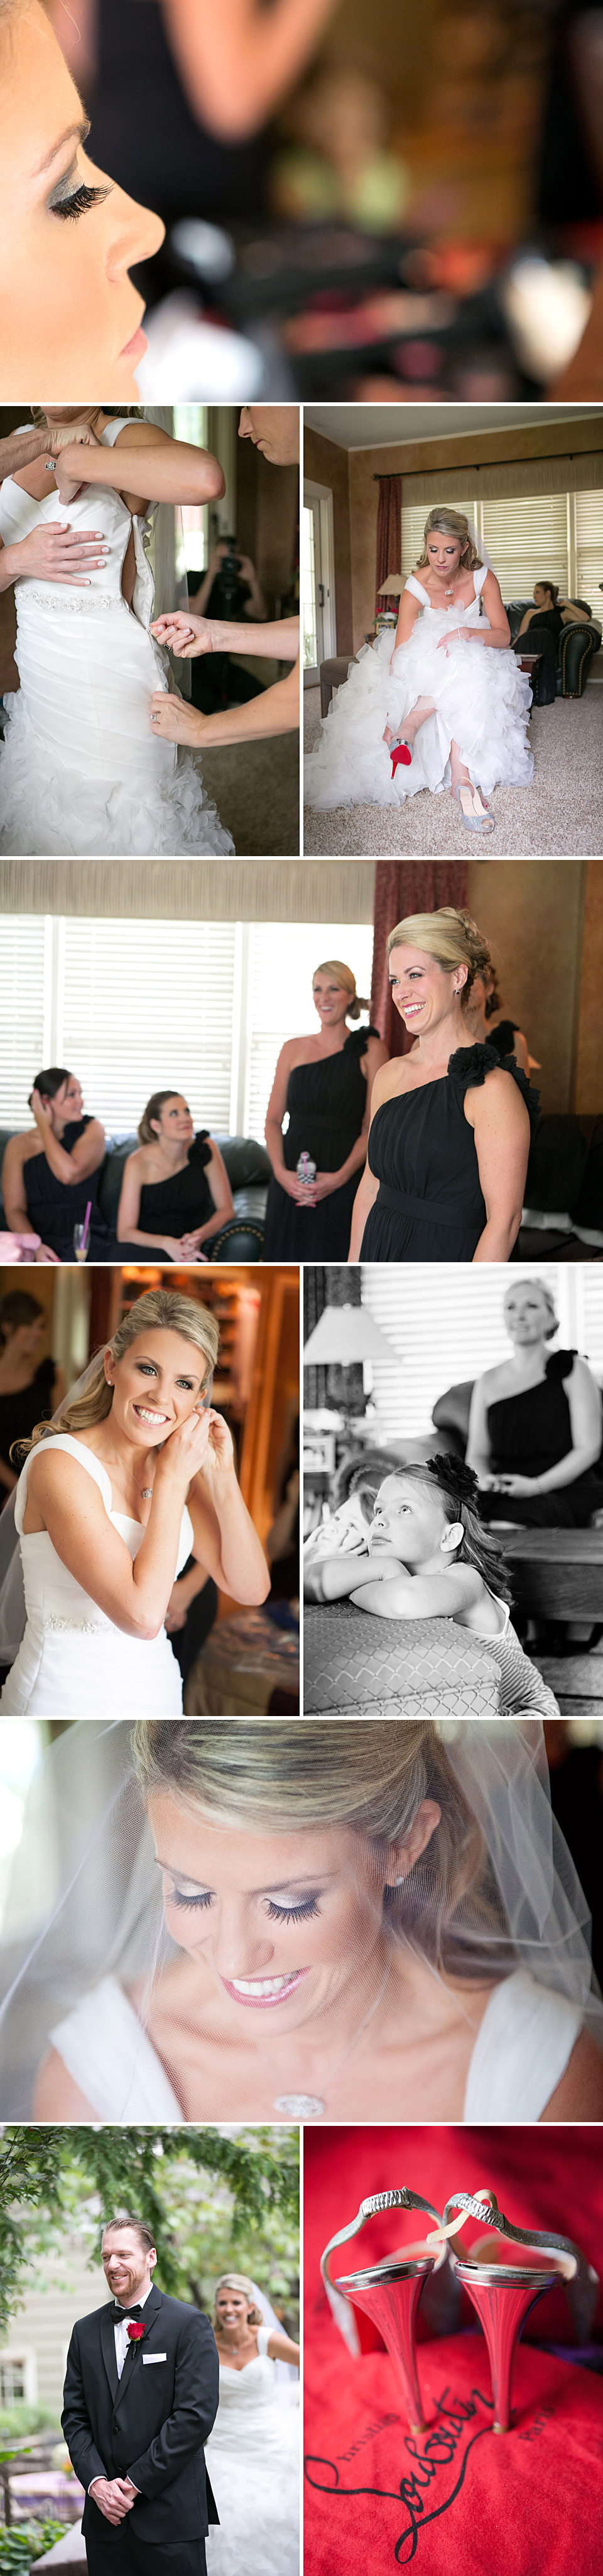 Family, adorable flower girls, bride getting ready, laughing, first site, Branches & Twigs, Jana Marler